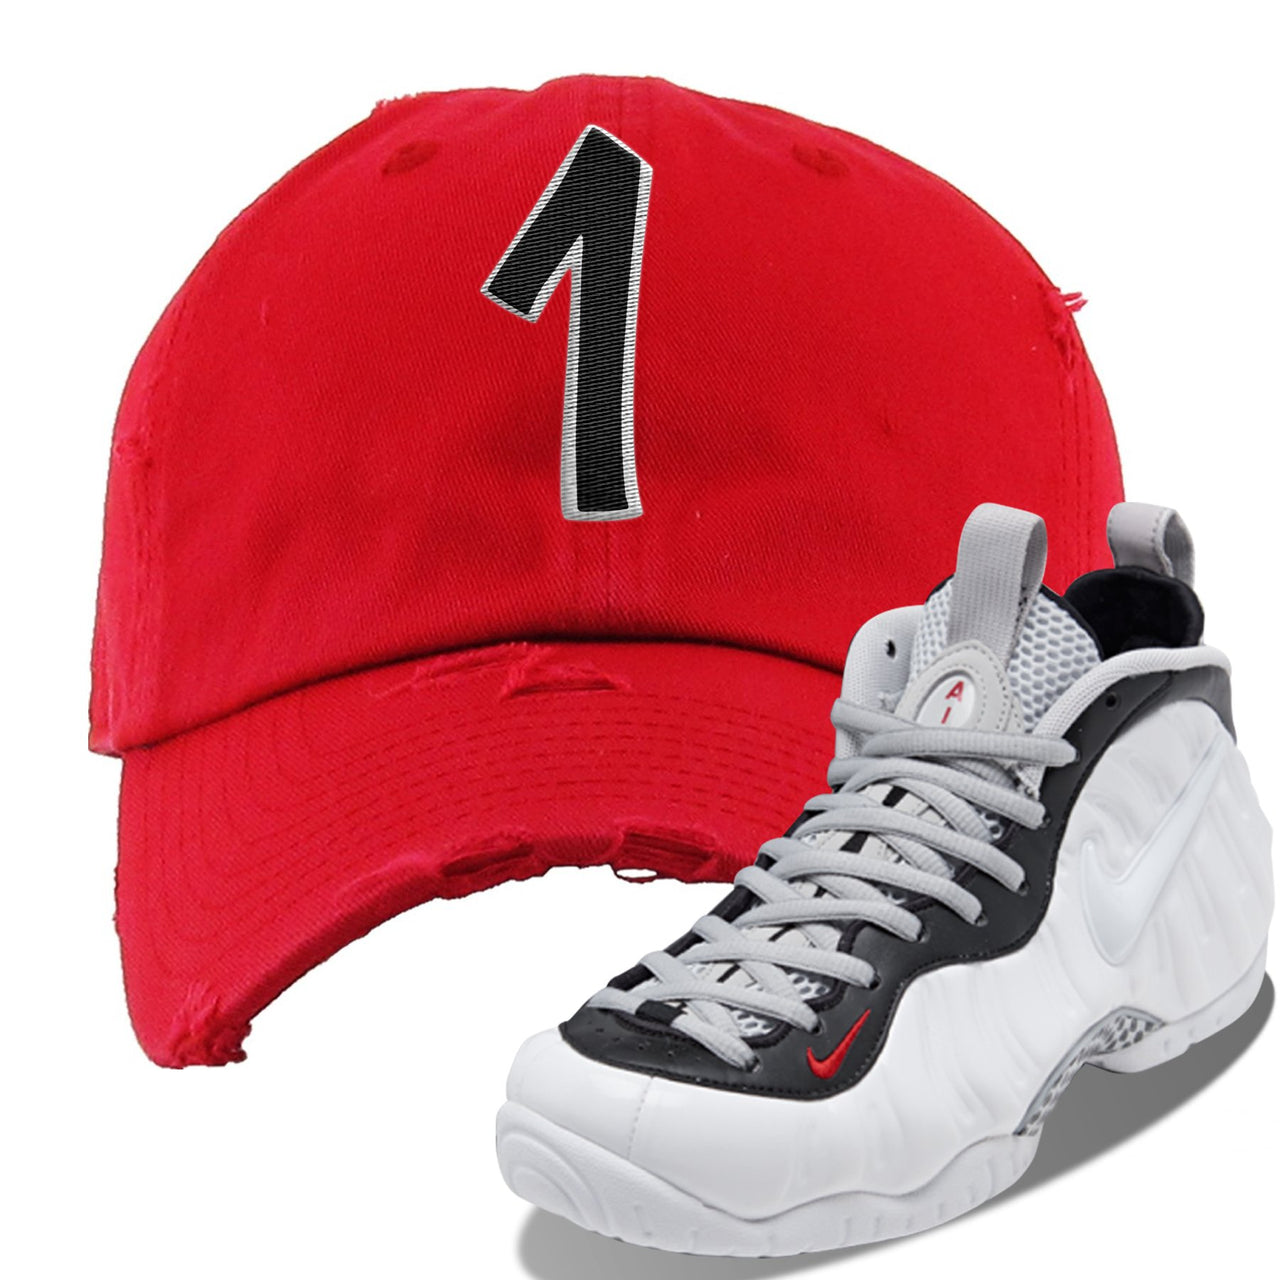 Foamposite Pro White Black University Red Sneaker Red Distressed Dad Hat | Hat to match Nike Air Foamposite Pro White Black University Red Shoes | Penny One